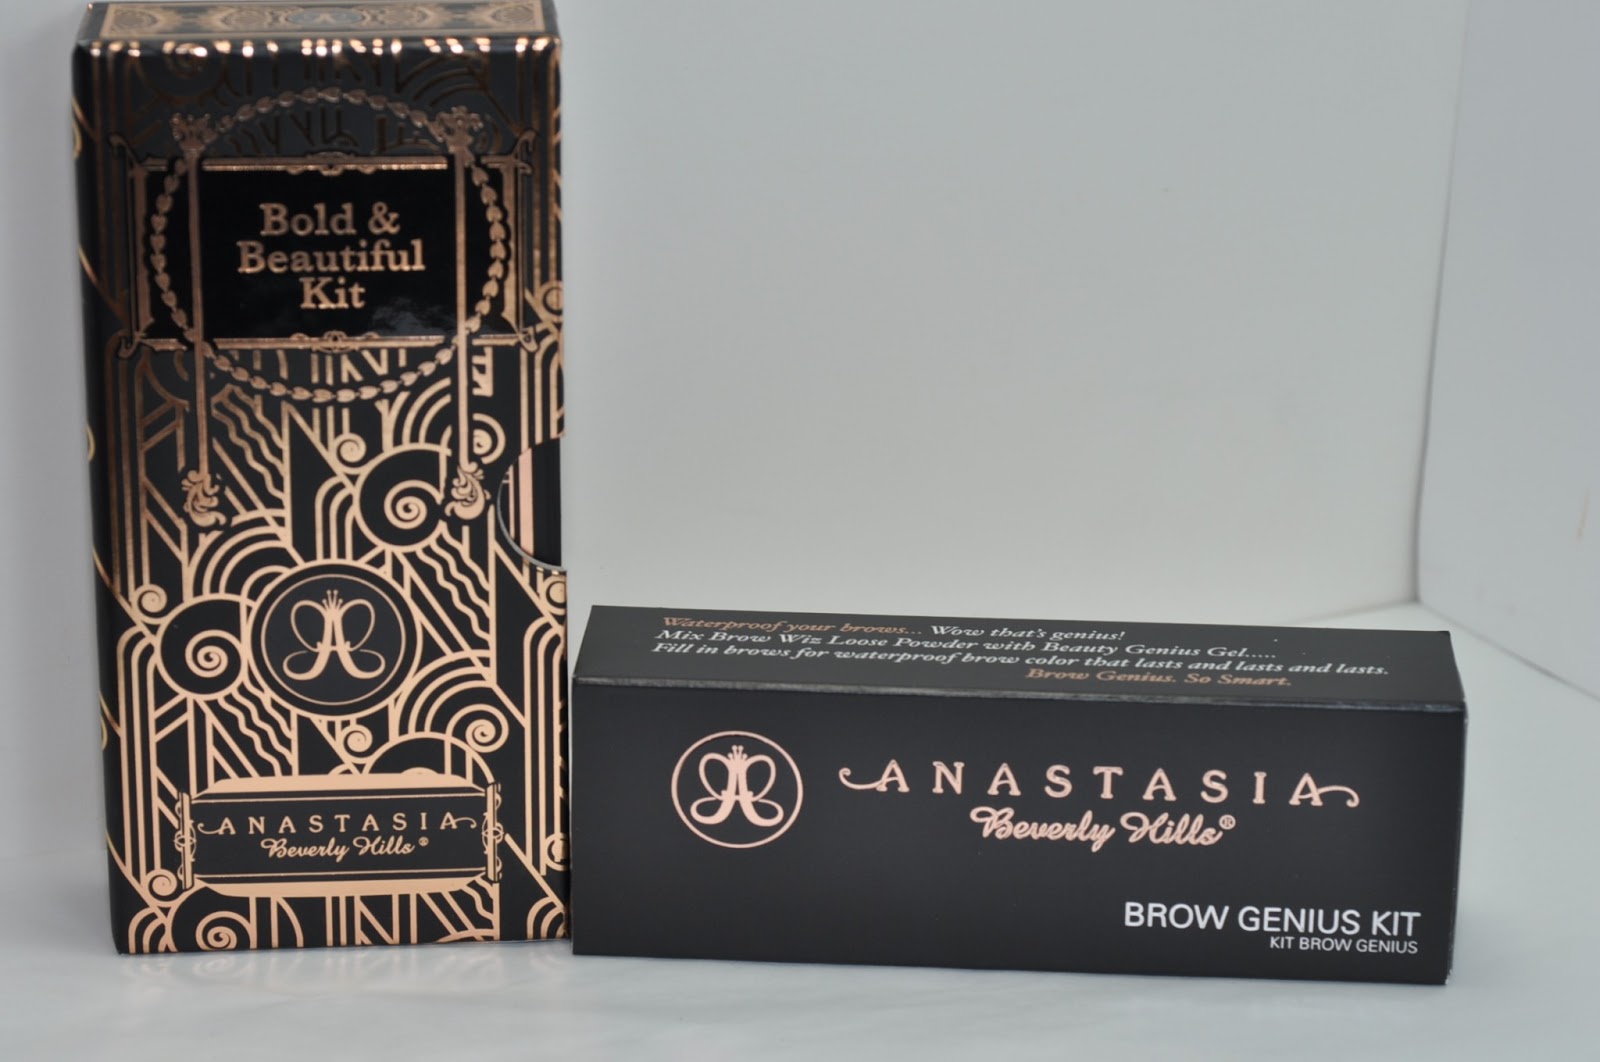 Anastasia Beverly Hills Brow Genius Kit Swatches, Review - The Shades Of U